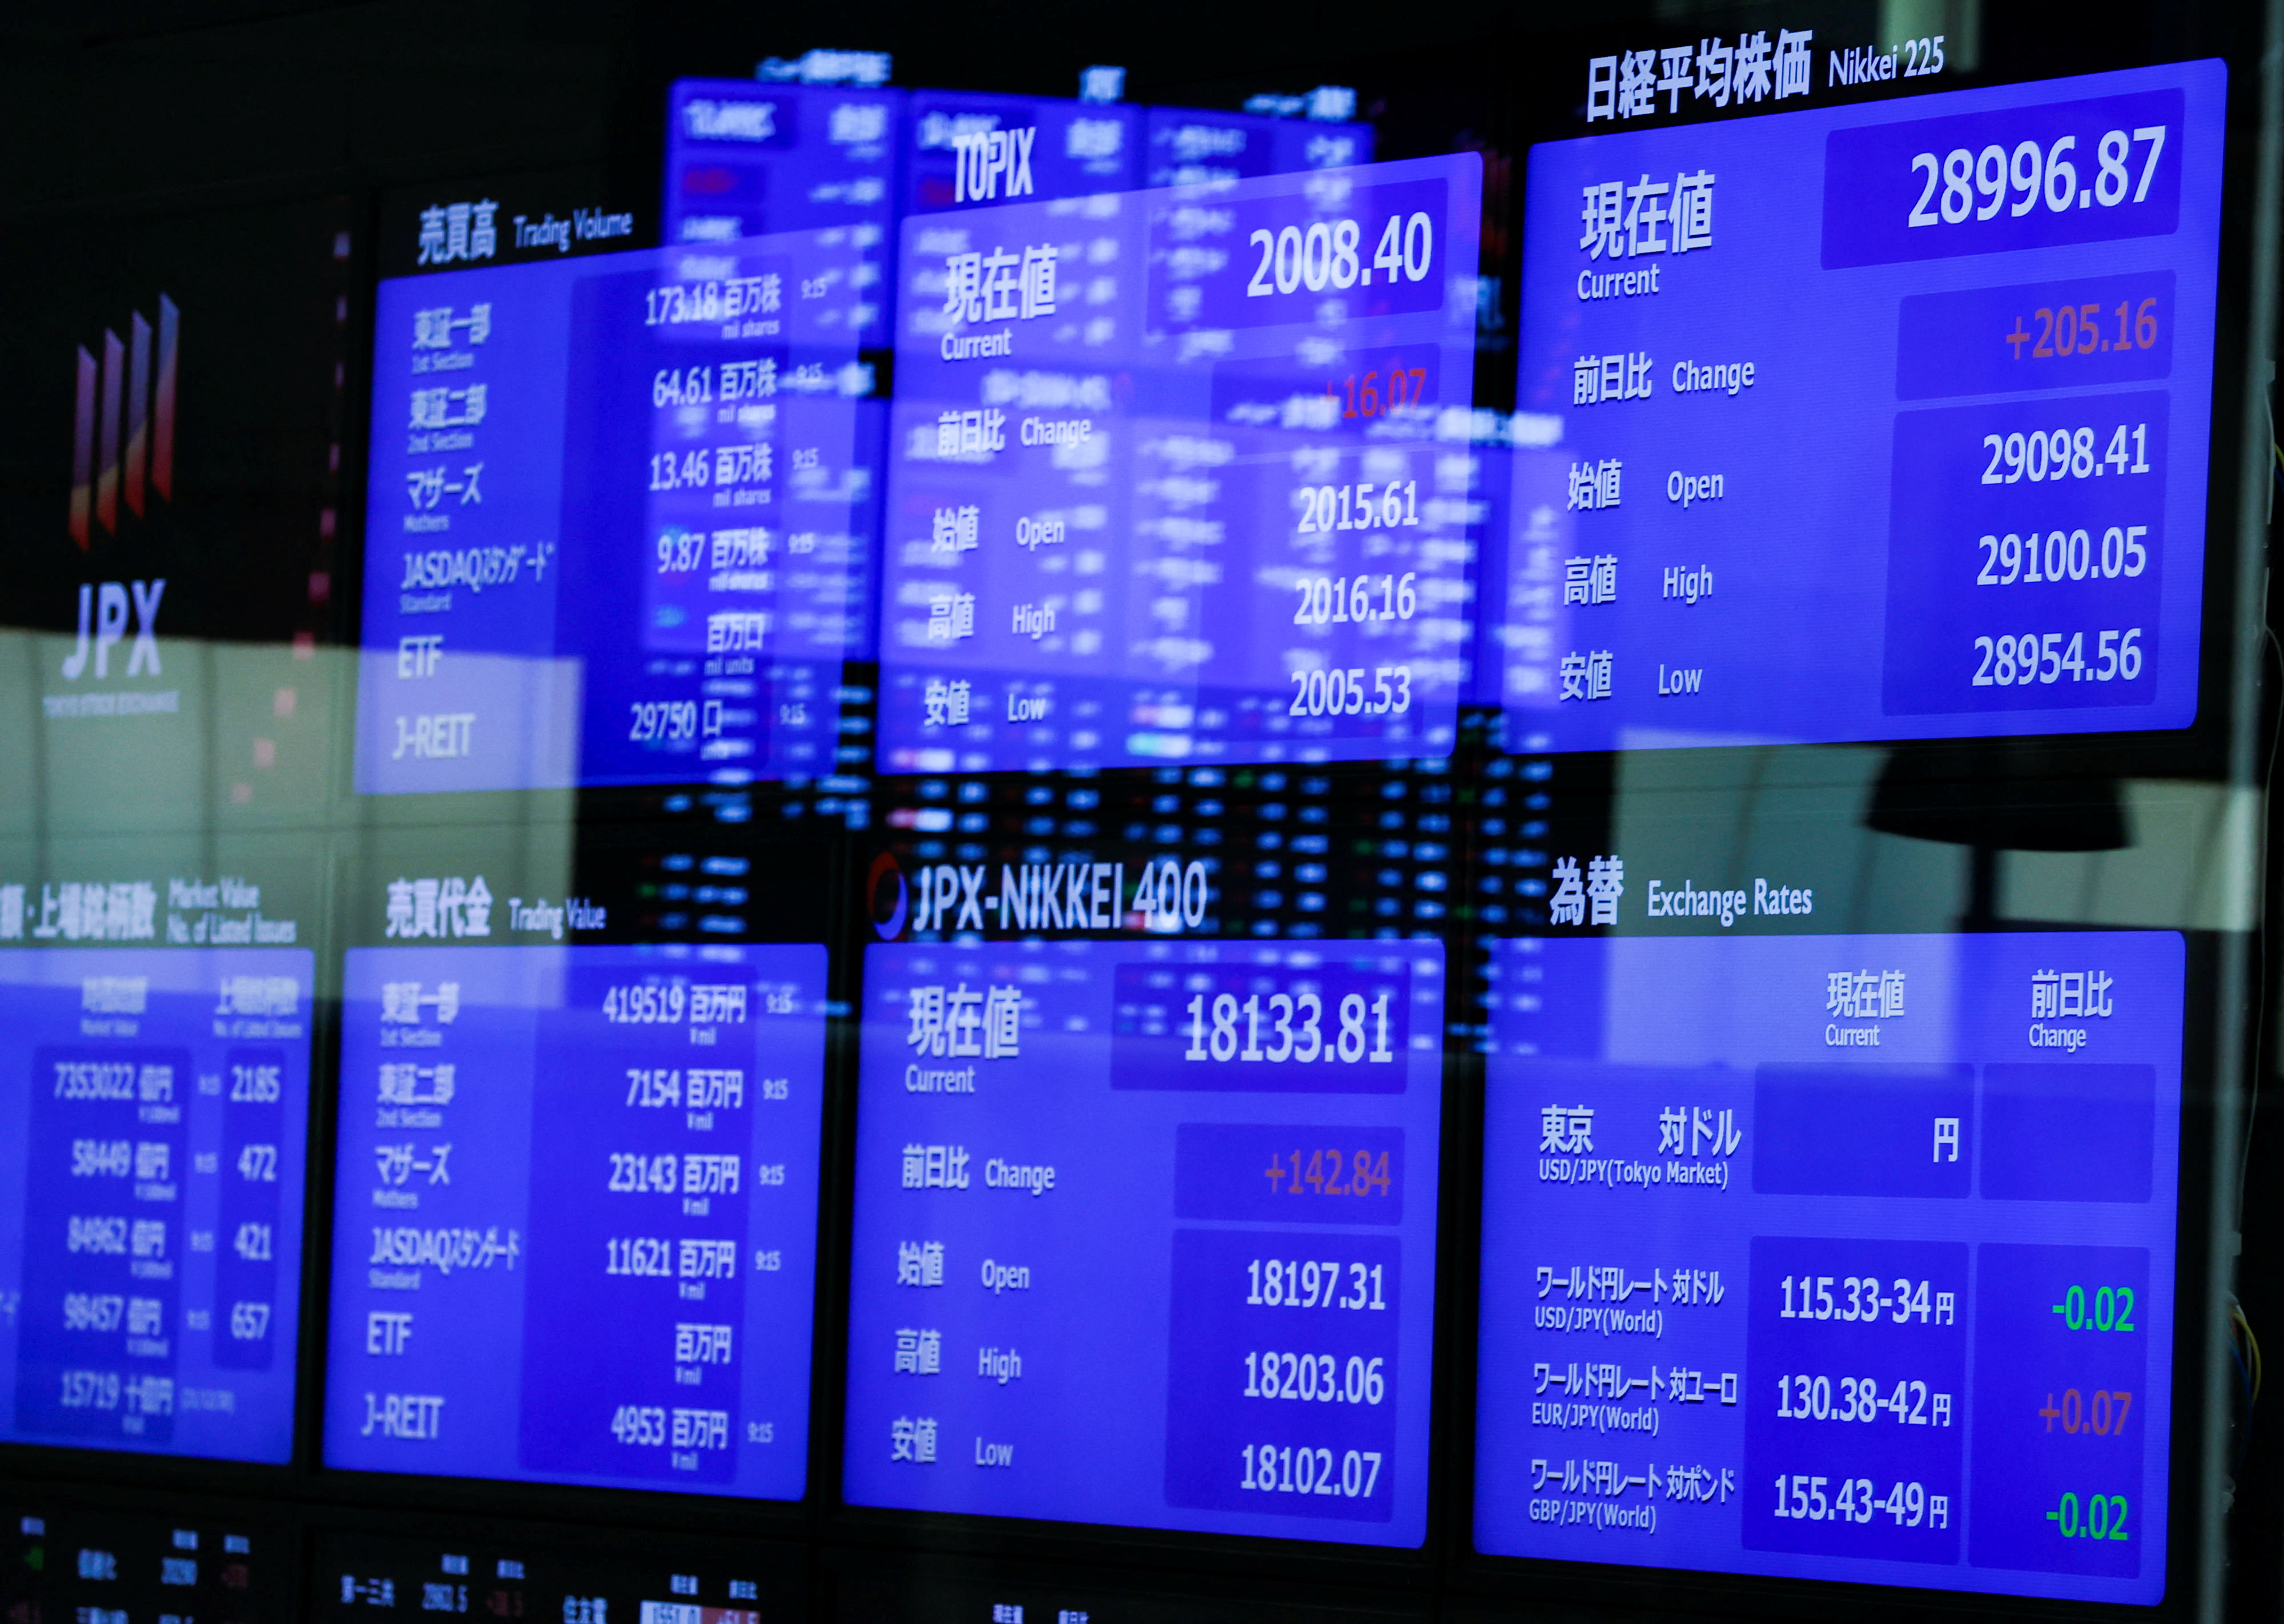 FILE PHOTO - Monitors displaying the stock index prices and Japanese yen exchange rate against the U.S. dollar are seen at the Tokyo Stock Exchange in Tokyo